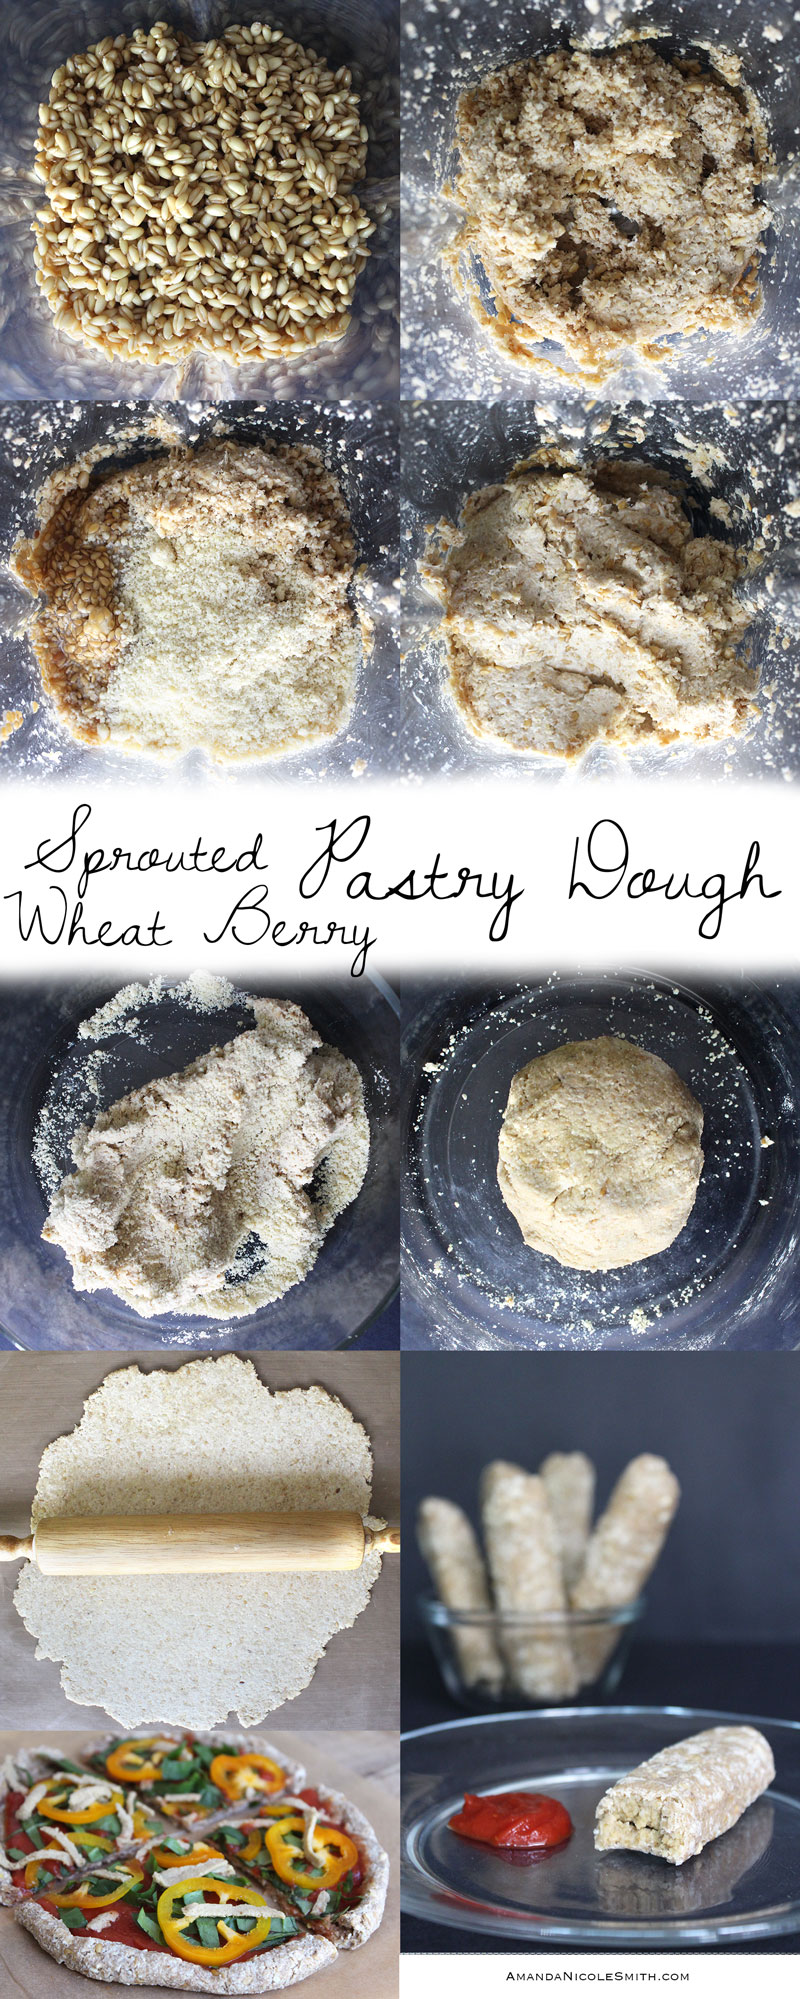 How To Make Sprouted Wheat Berry Pastry Dough